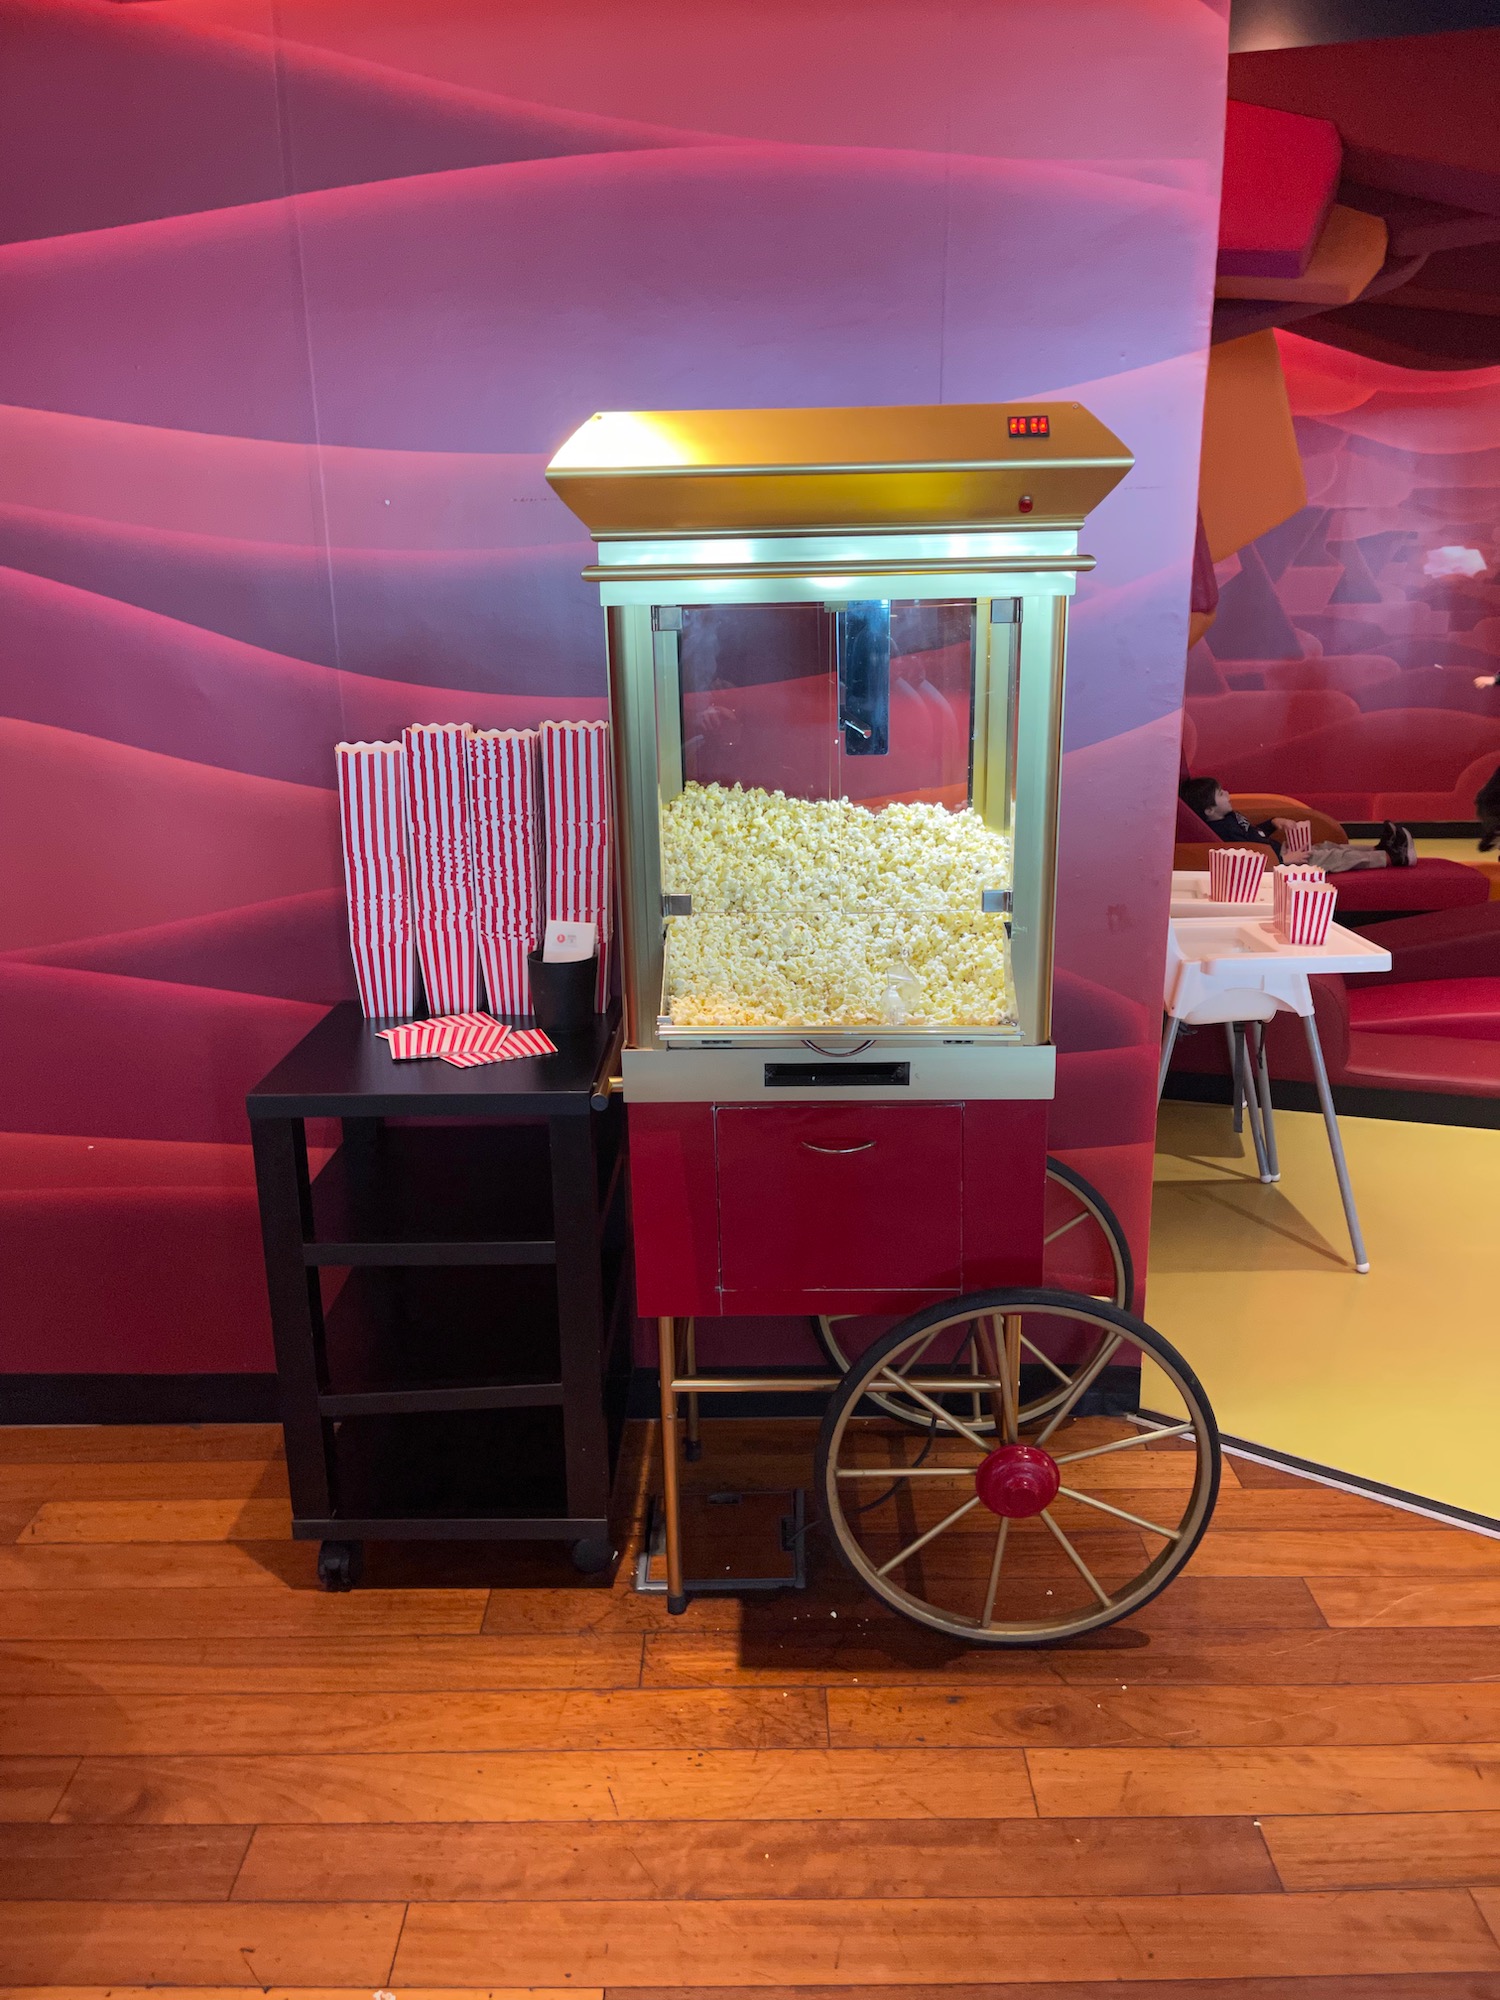 a machine with popcorn in it